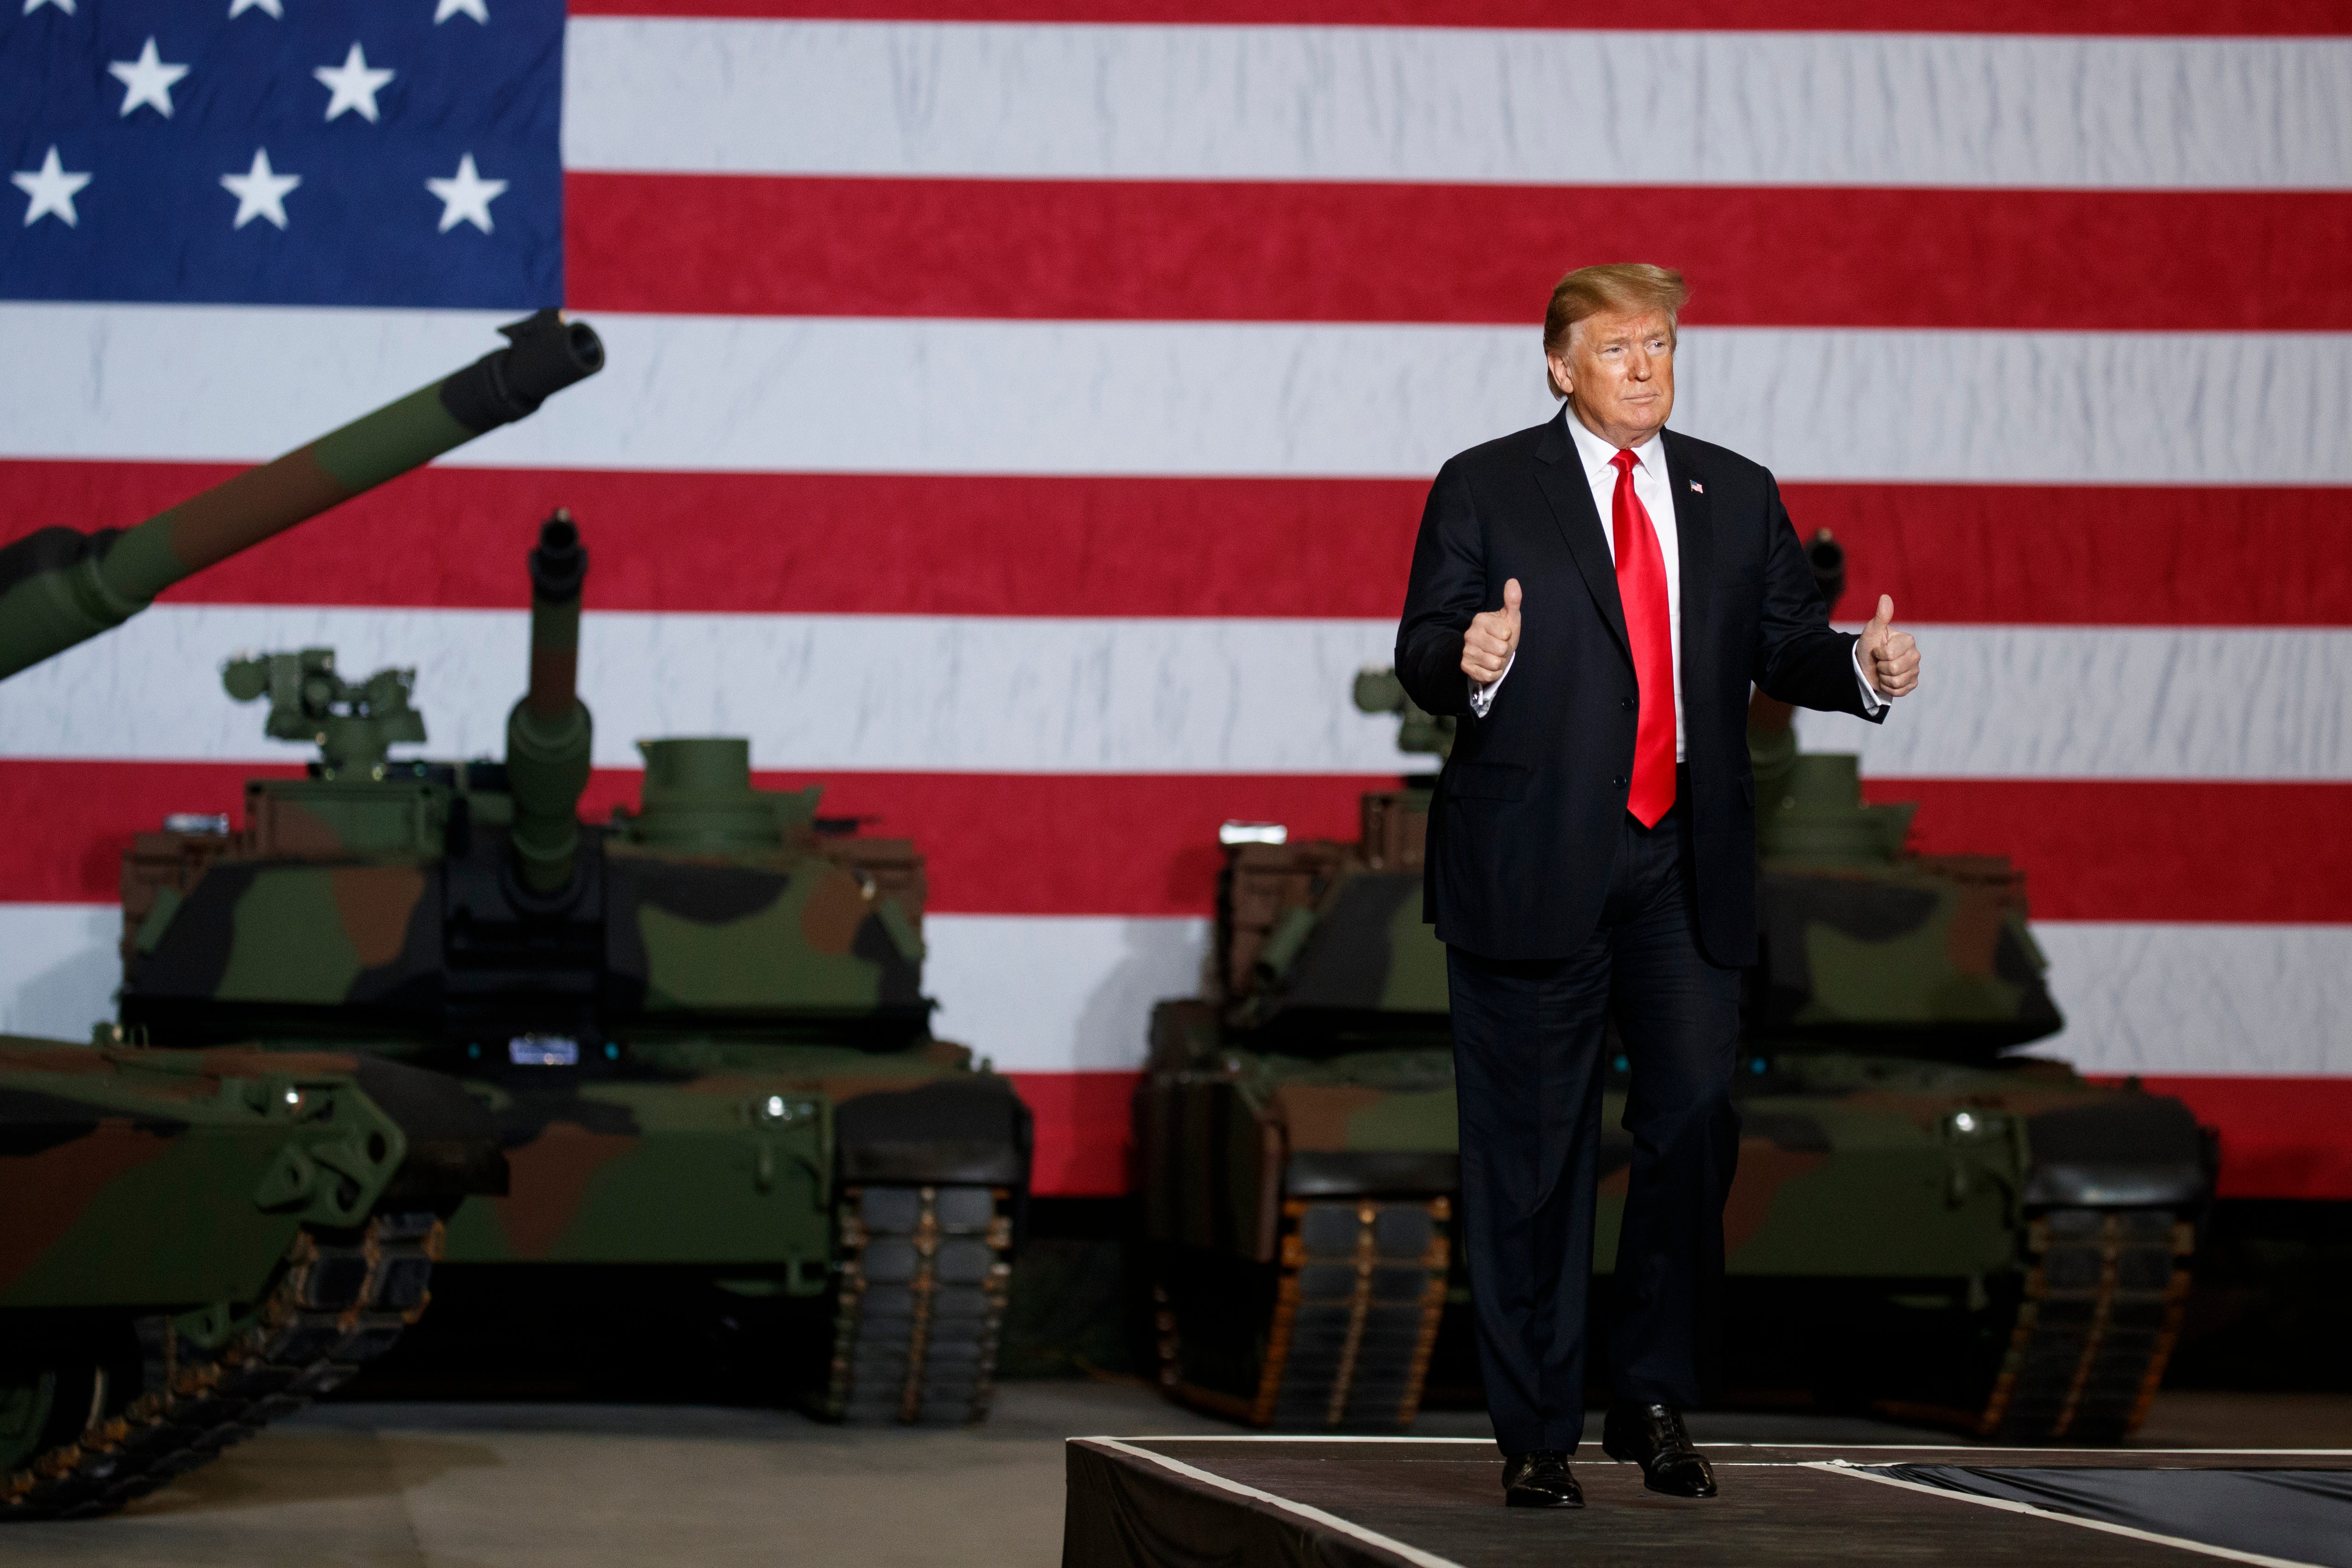 President Donald Trump arrives to deliver remarks at the Lima Army Tank Plant, Wednesday, March 20, 2019, in Lima, Ohio.